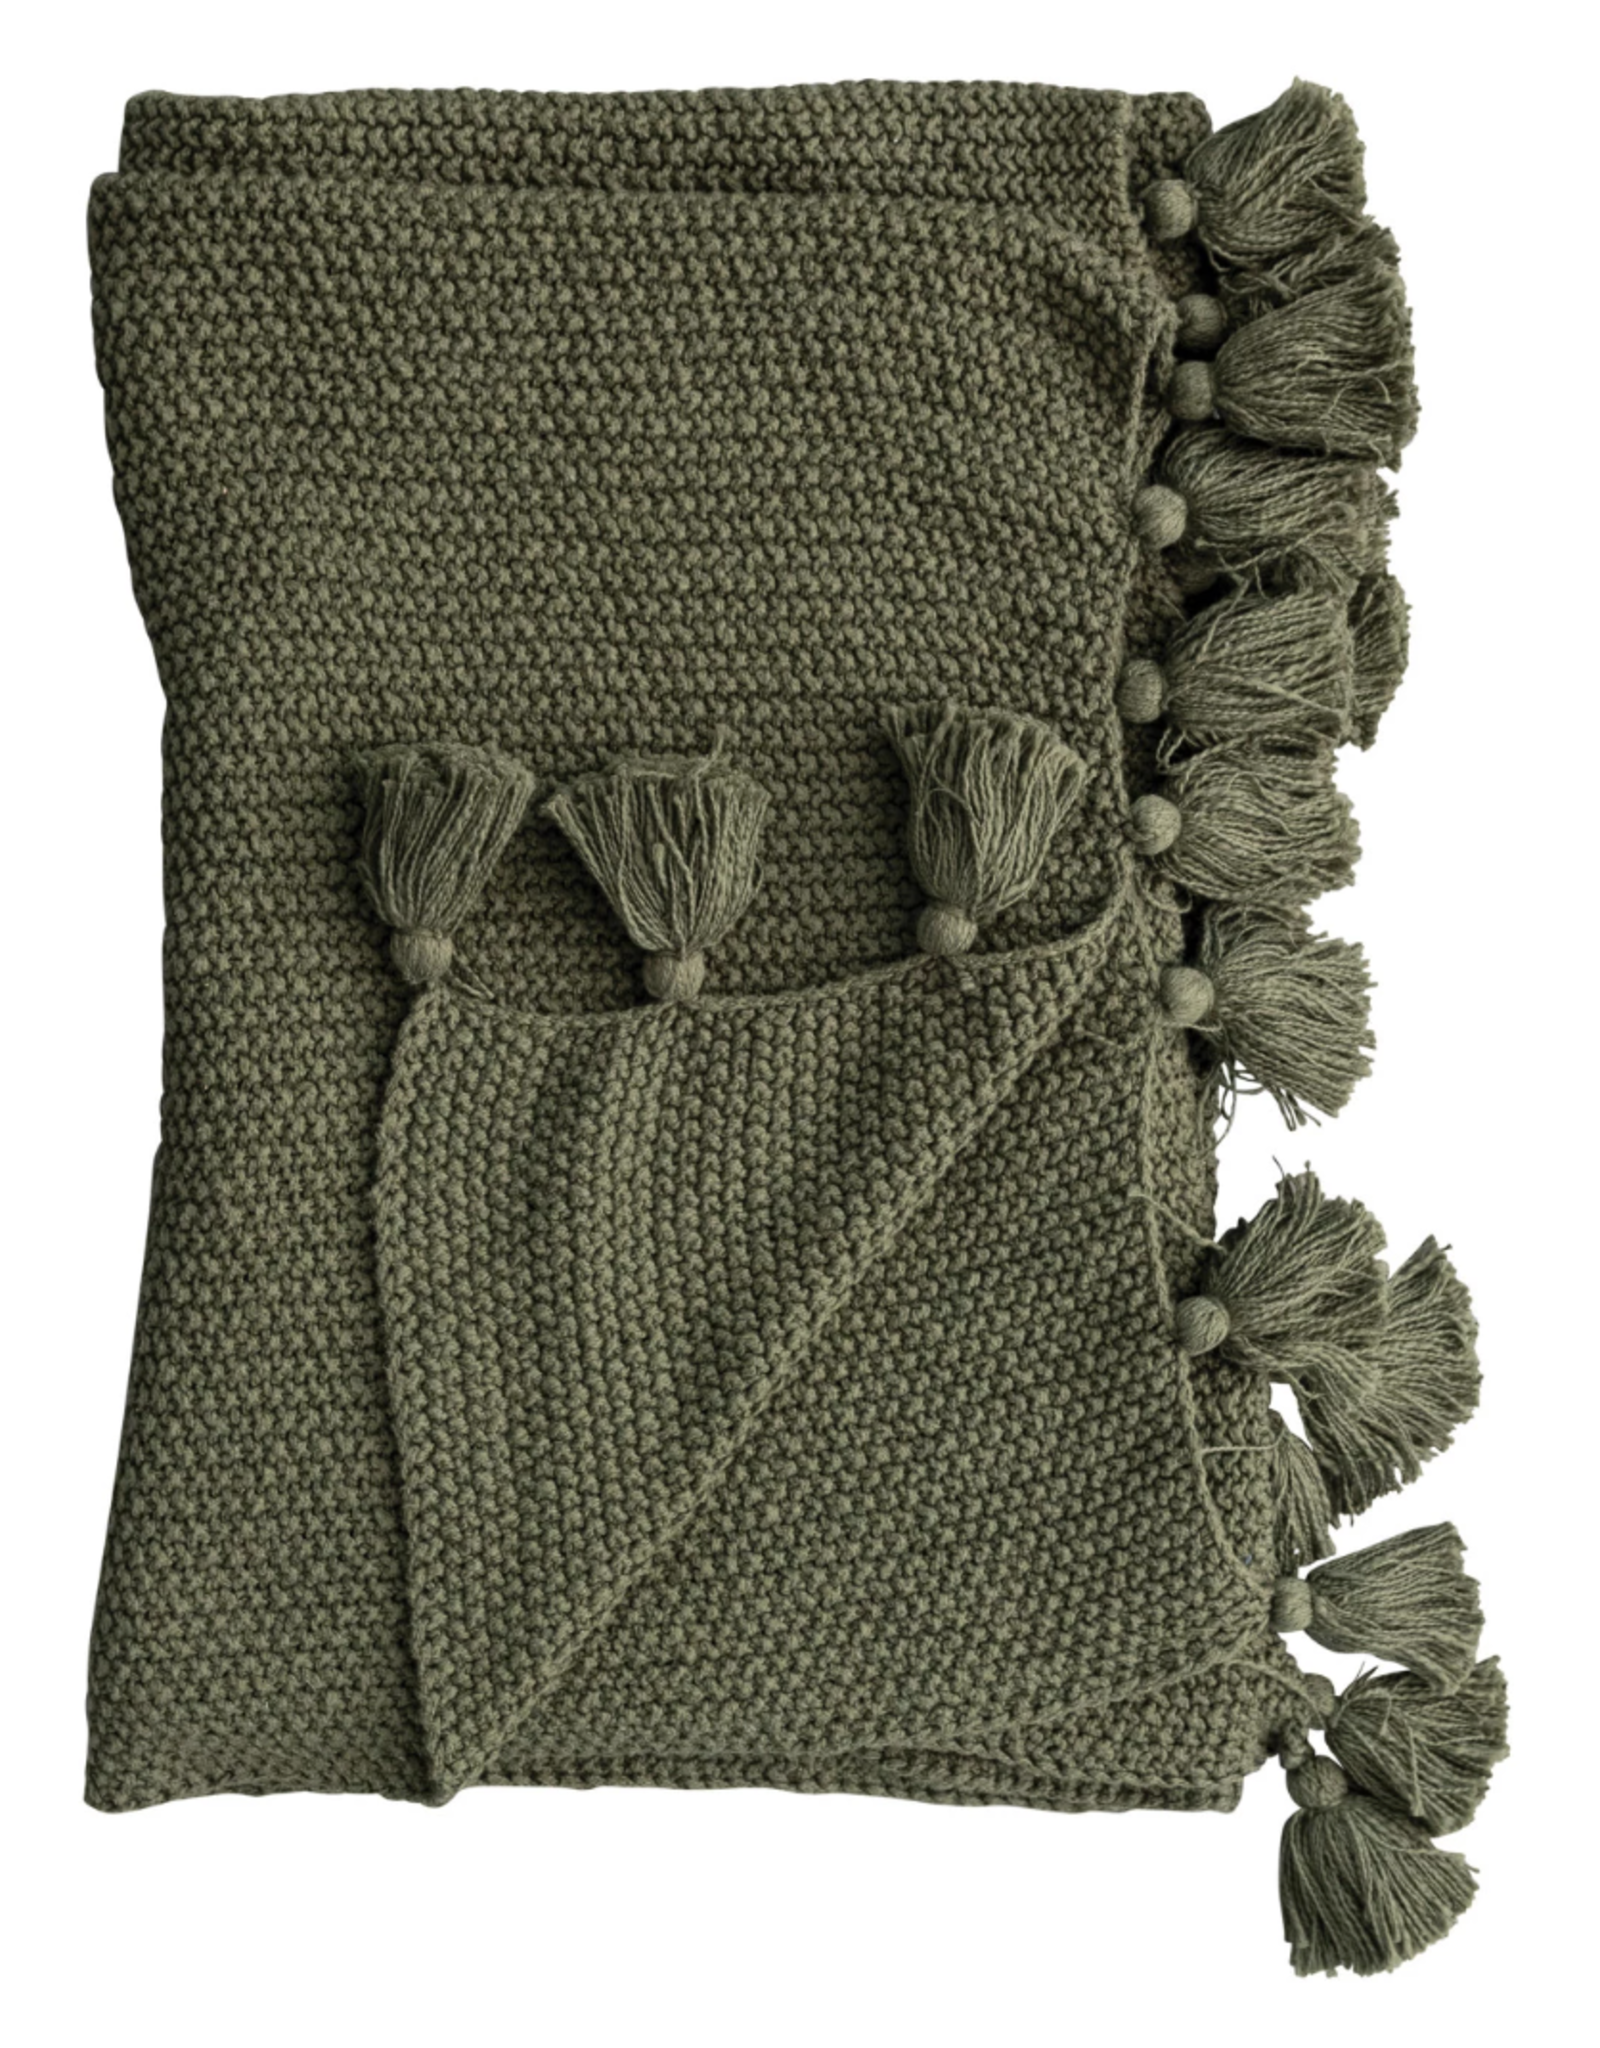 Creative Co-Op 60"x50" Cotton Knit Throw in Olive